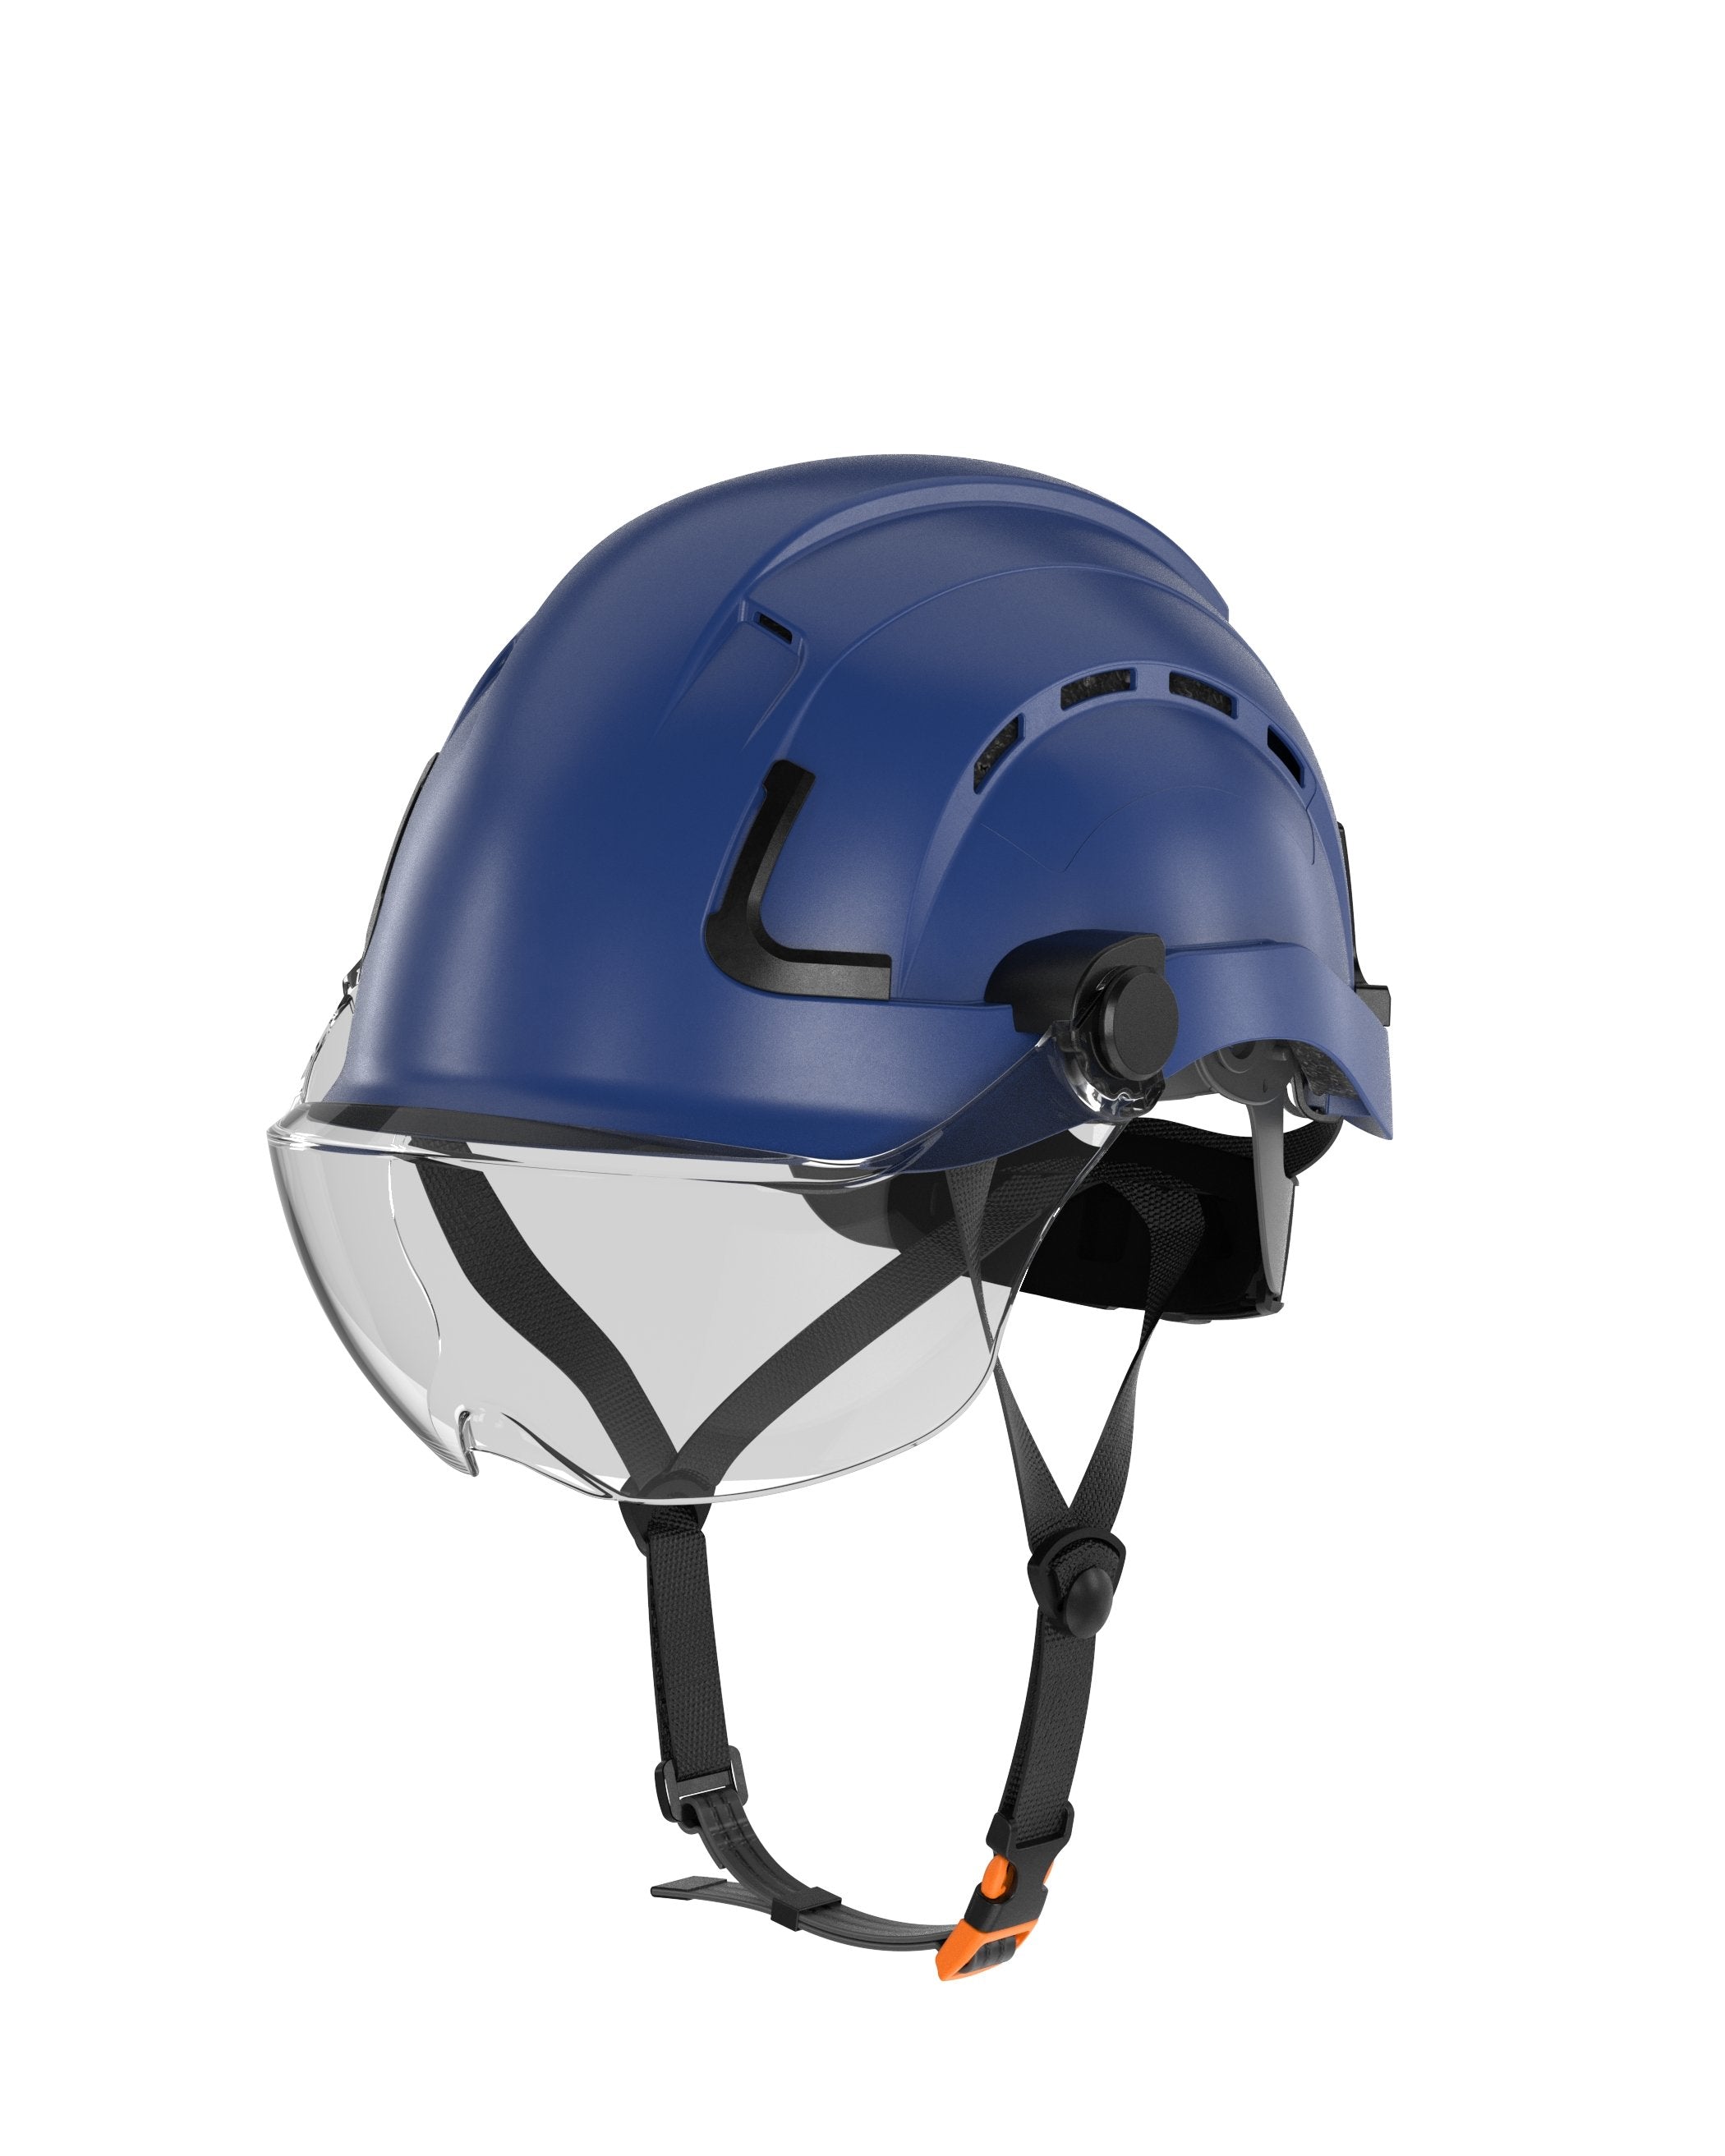 H2-CH Safety Helmet w/ clear visor Type 2 Class C, ANSI Z89 and EN12492  rated